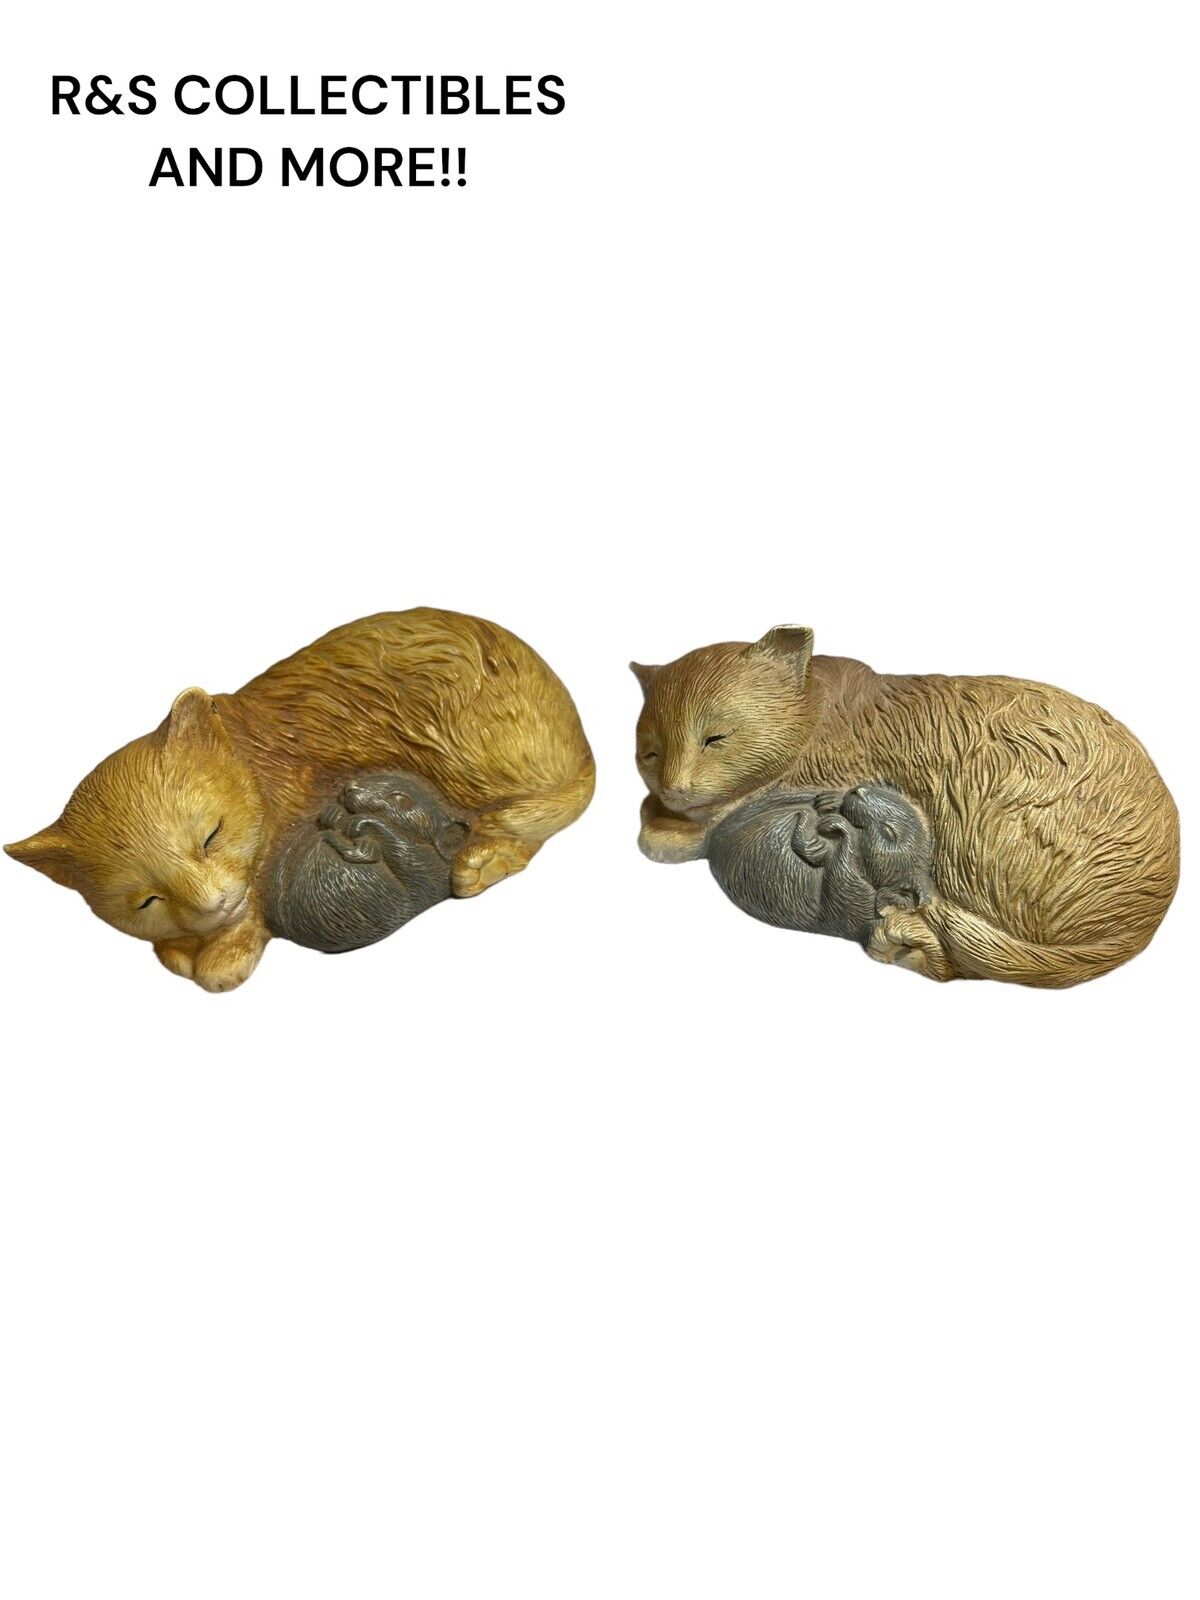 2 Vintage Cat and Mouse Figurine Curled Up Sleeping Resin Figurine, 5”L X 2”T